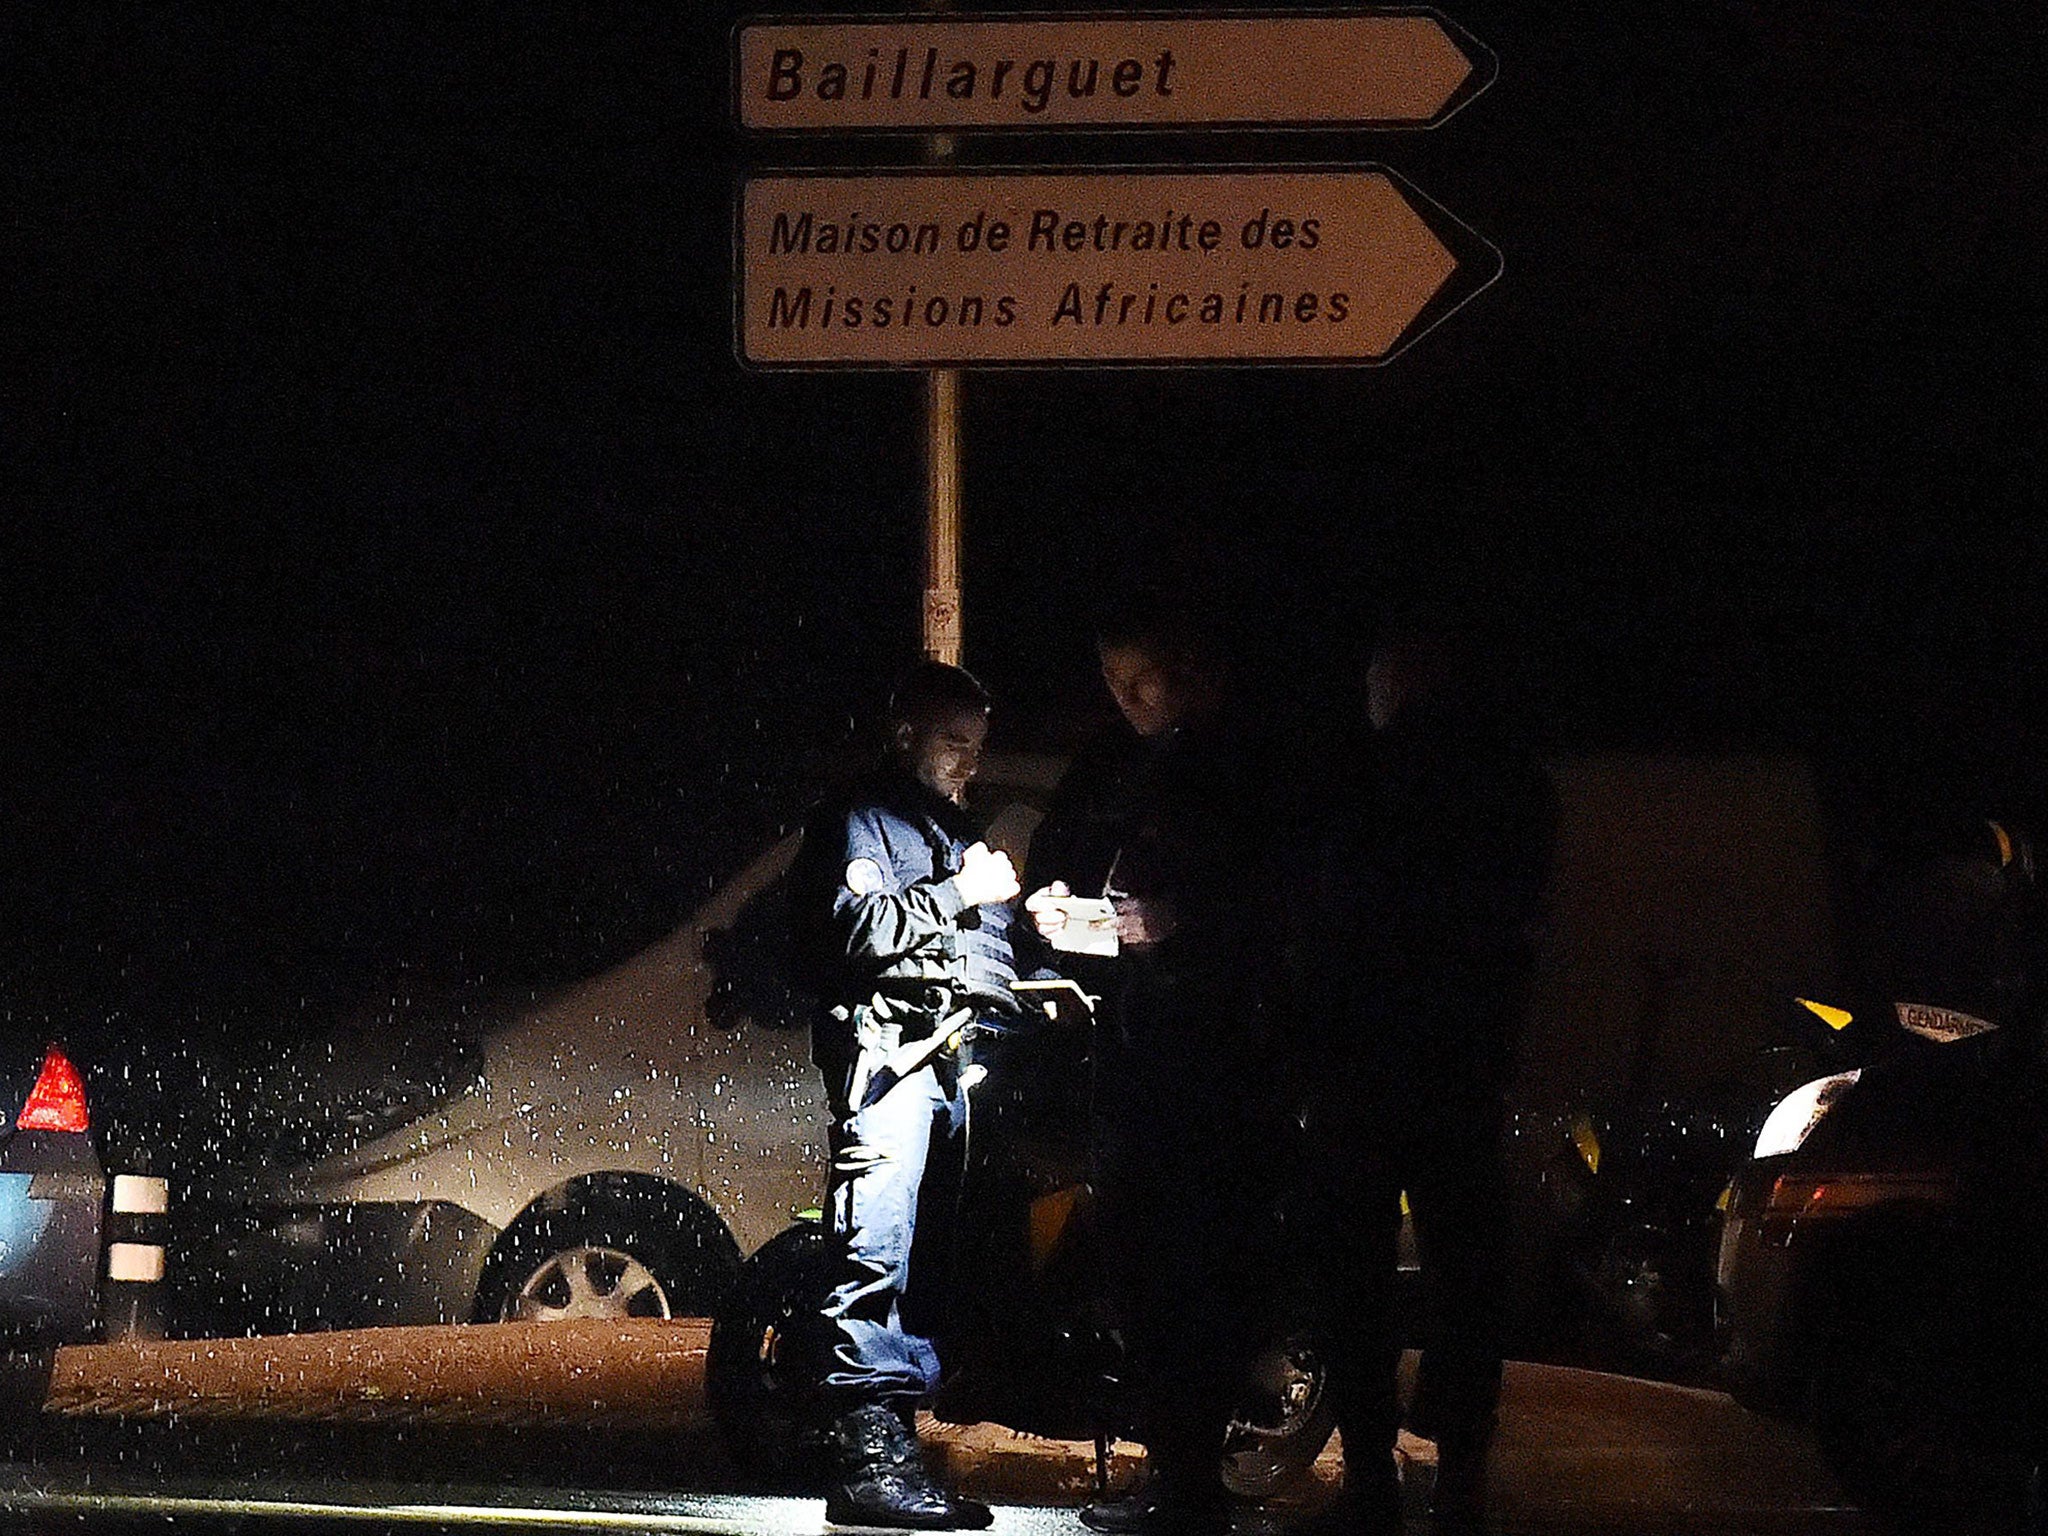 Police at a retirement home for Catholic missionaries in Montferrier-sur-Lez in France, following an attack on 24 November